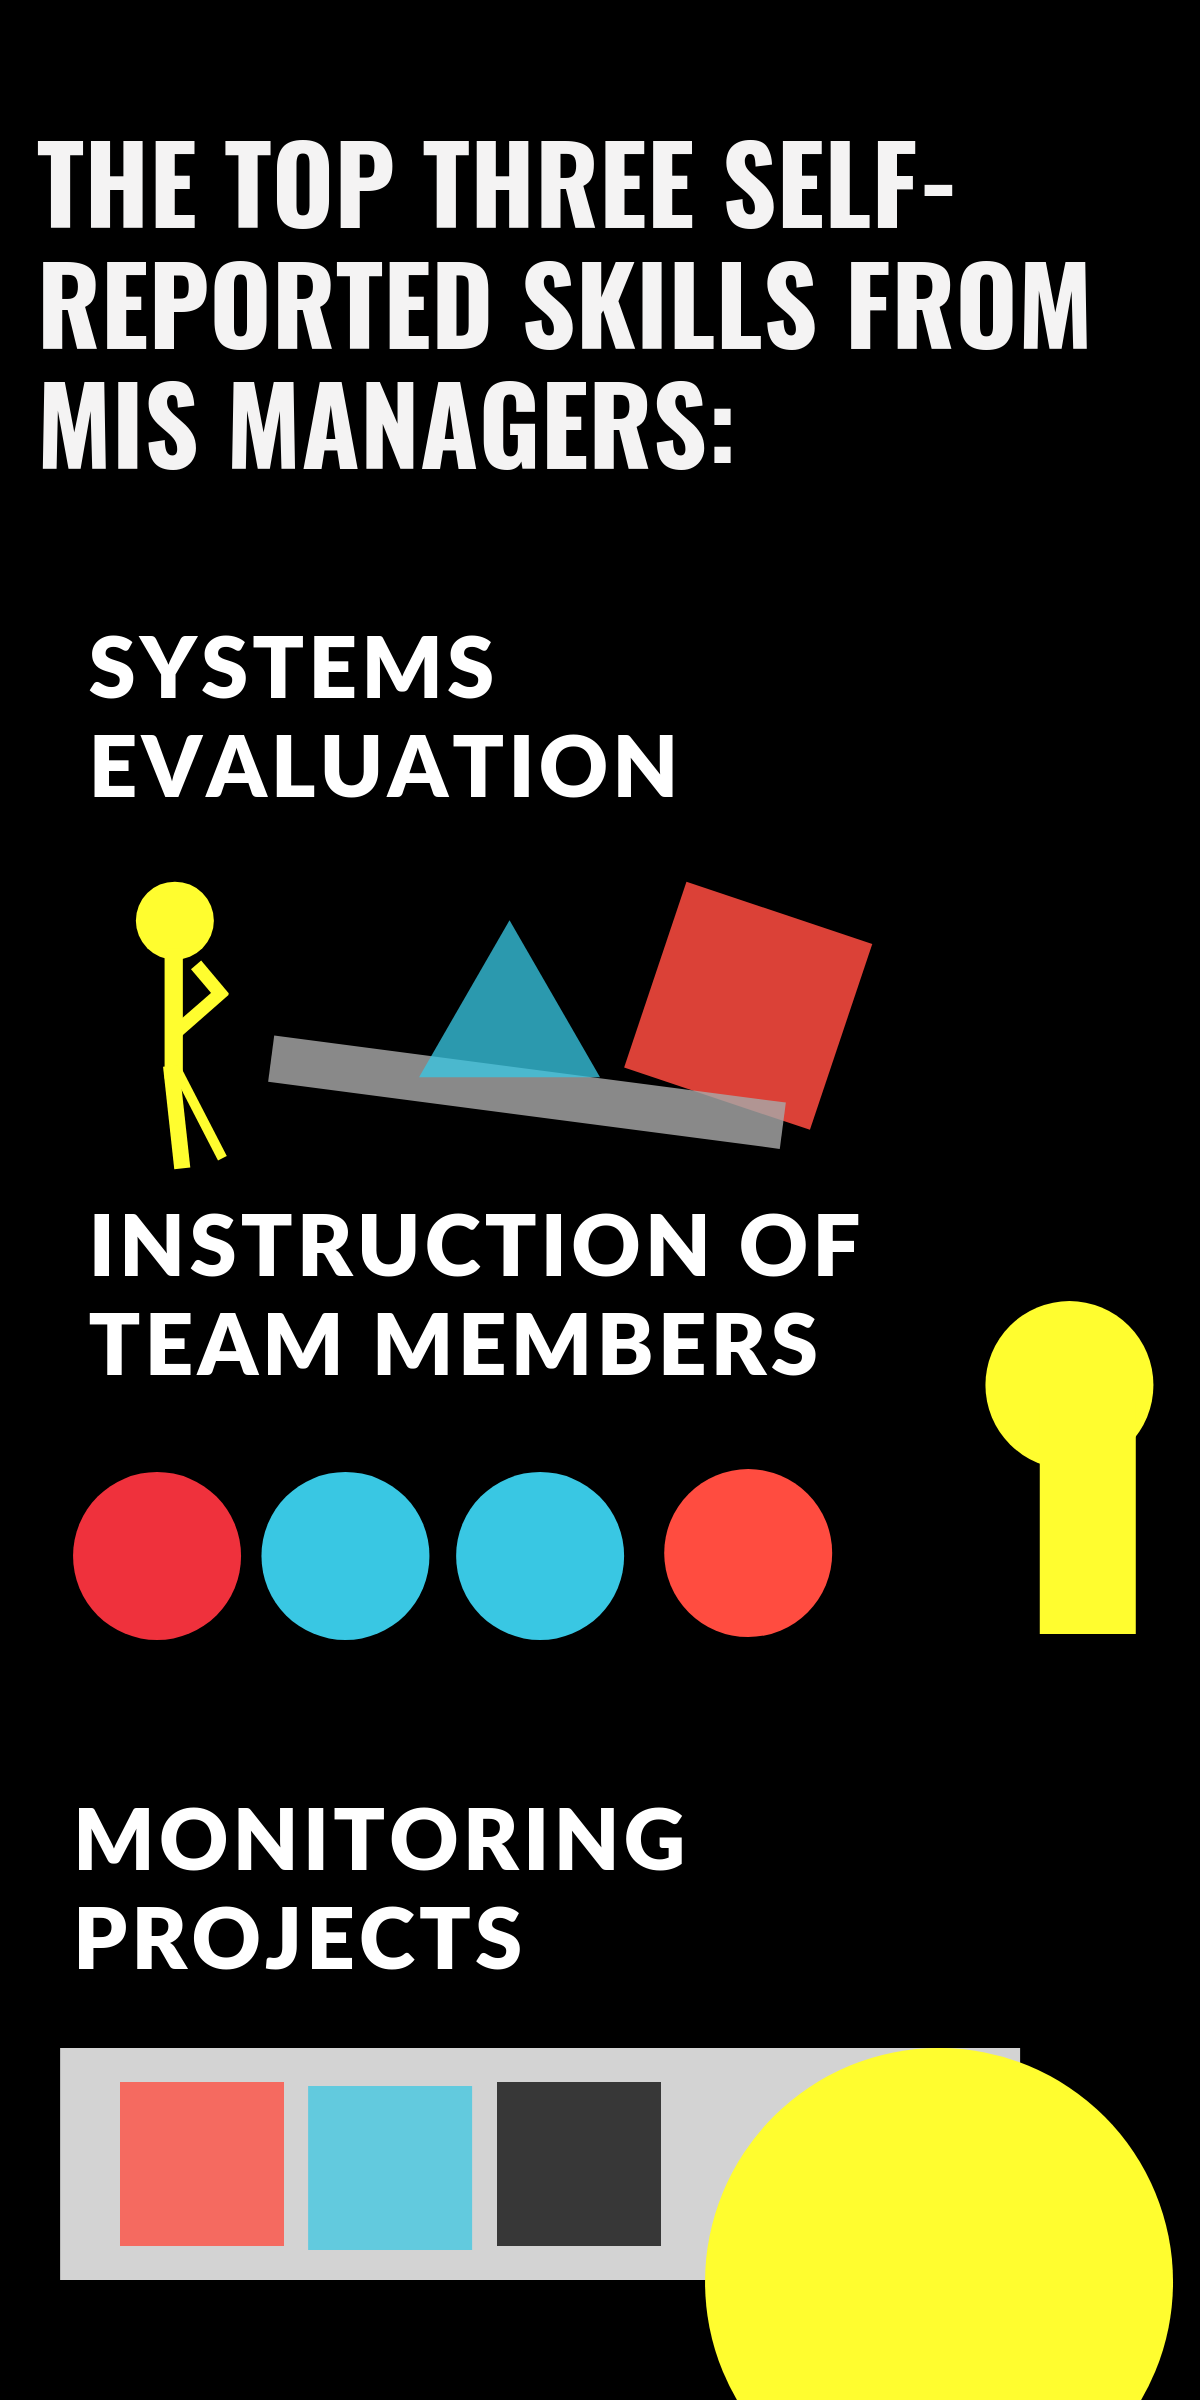 The Top three self-reported skills from mis managers: system evaluation, instruction of team members, monitoring projects